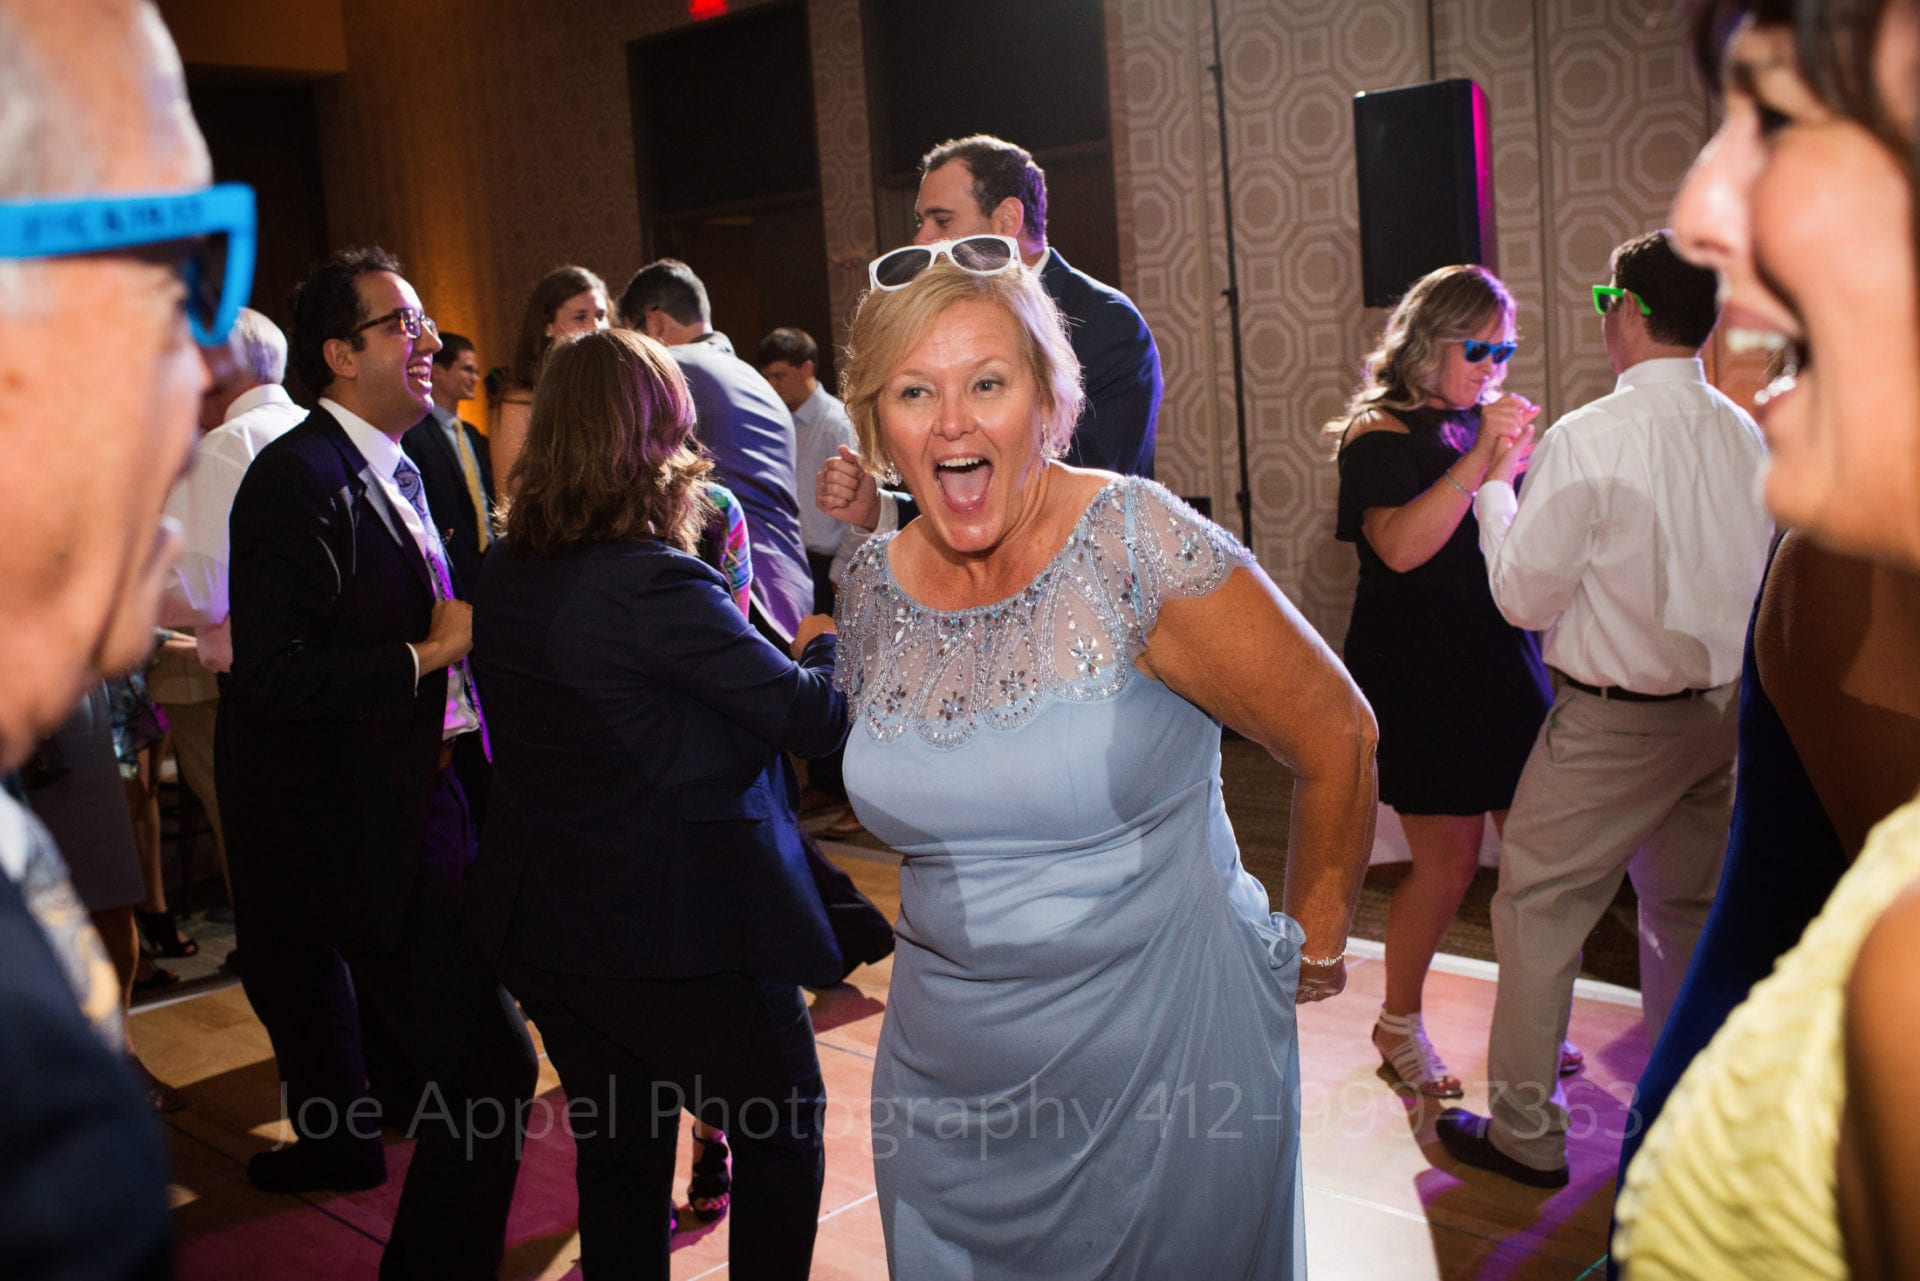 A woman wearing a light blue dress laughs as she dances with a man and a woman in a yellow dress Fairmont Hotel Pittsburgh Weddings.